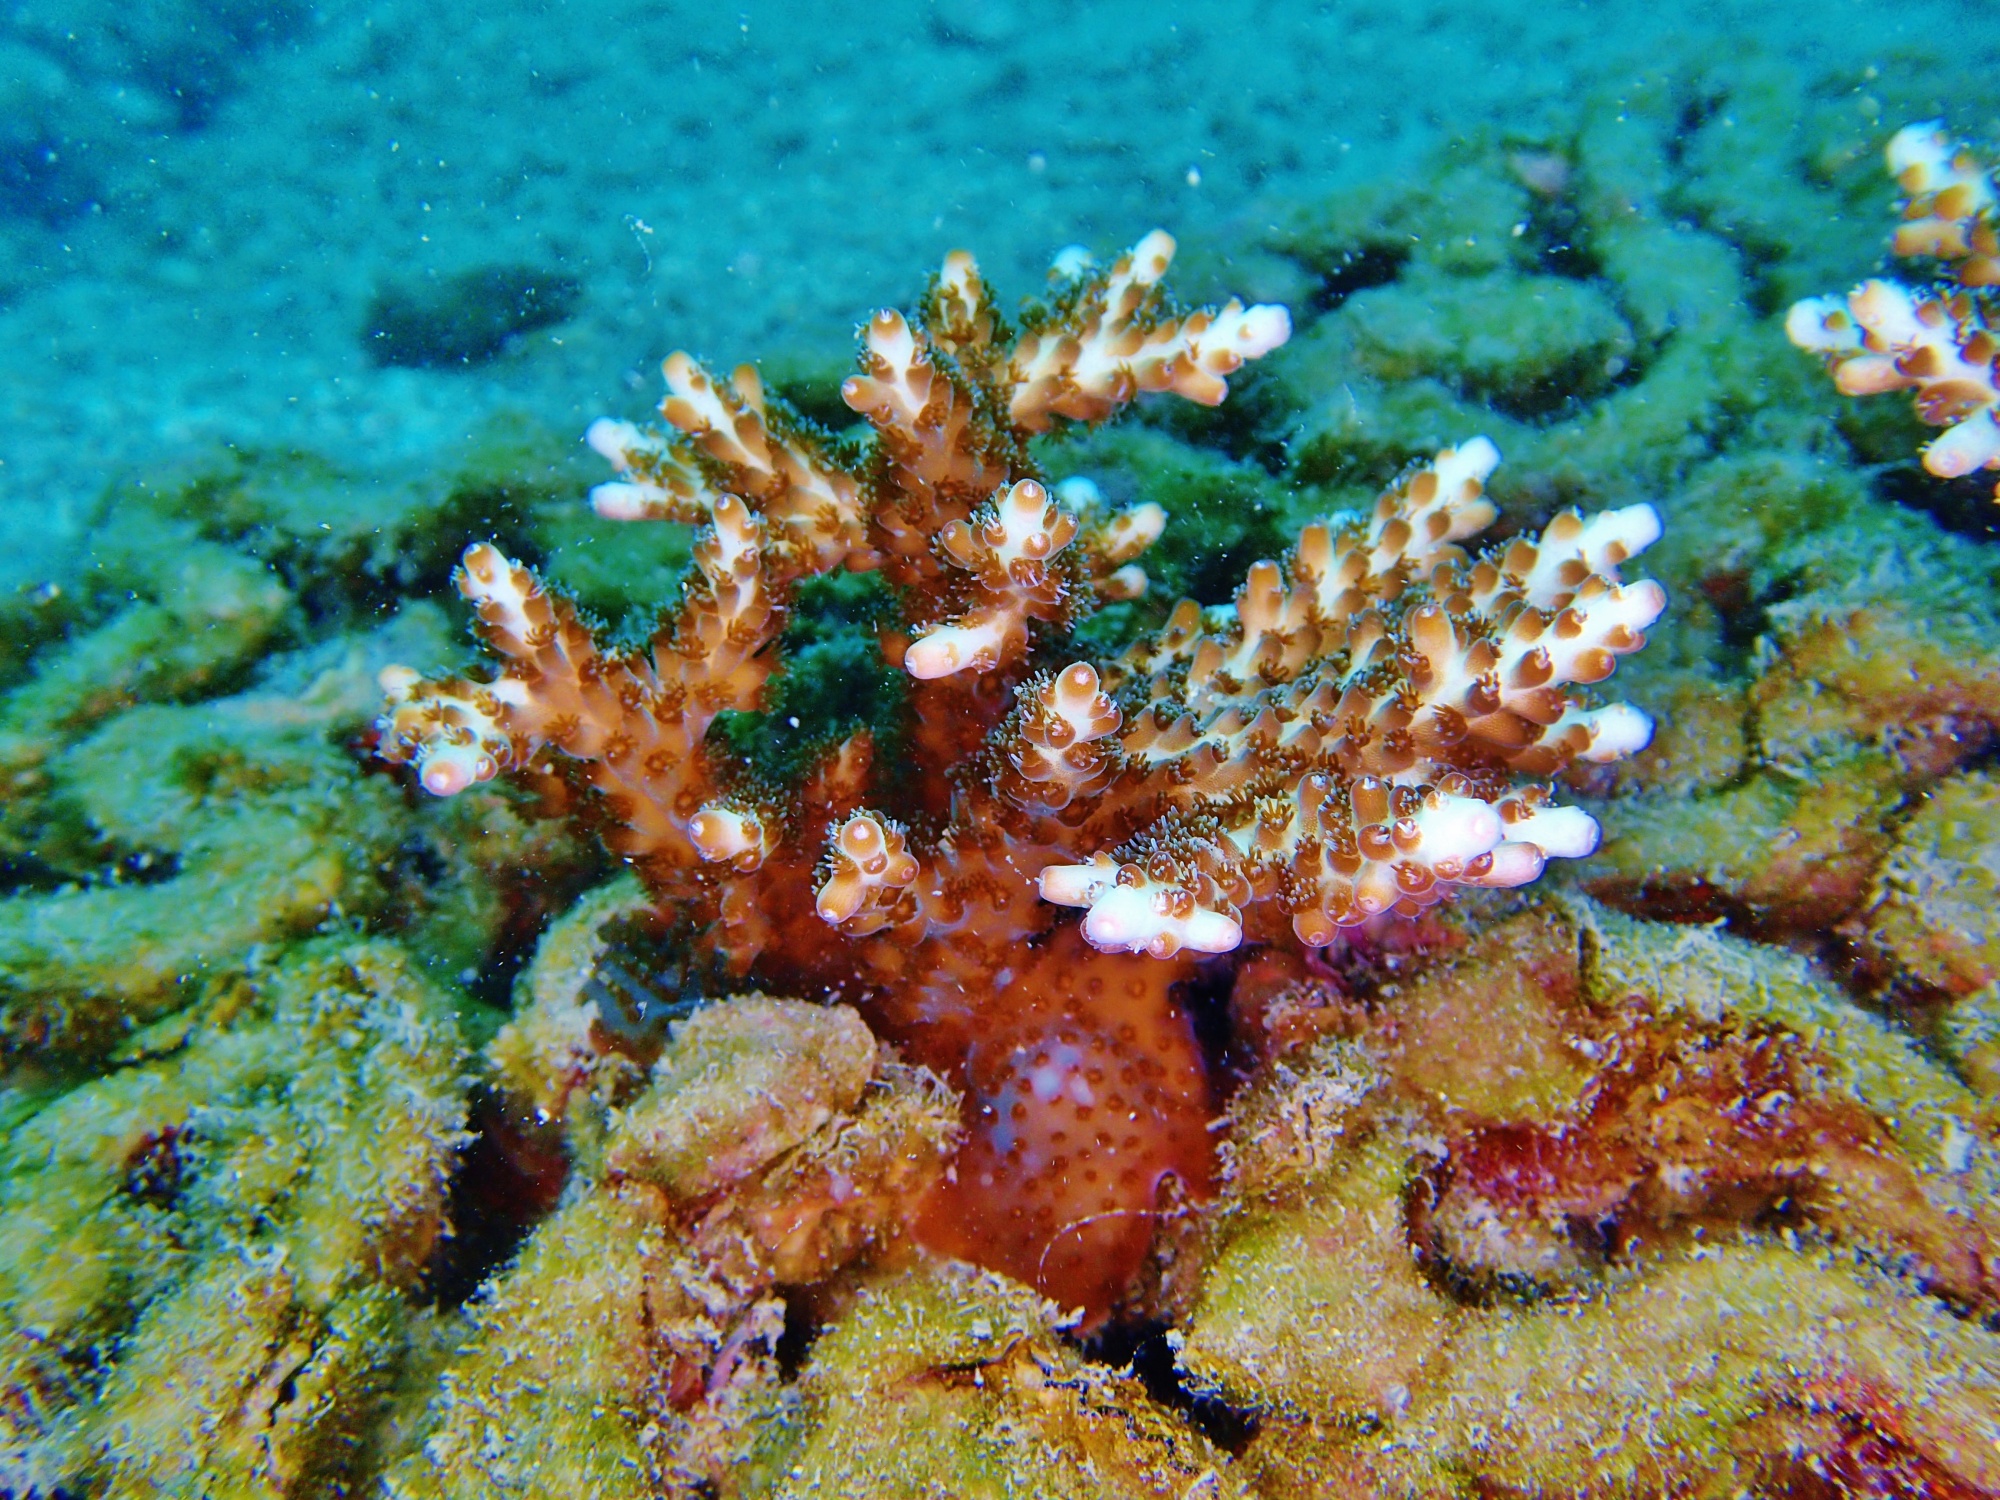 Transplanted Coral Is Thriving on a 3D-Printed Reef in Hong Kong